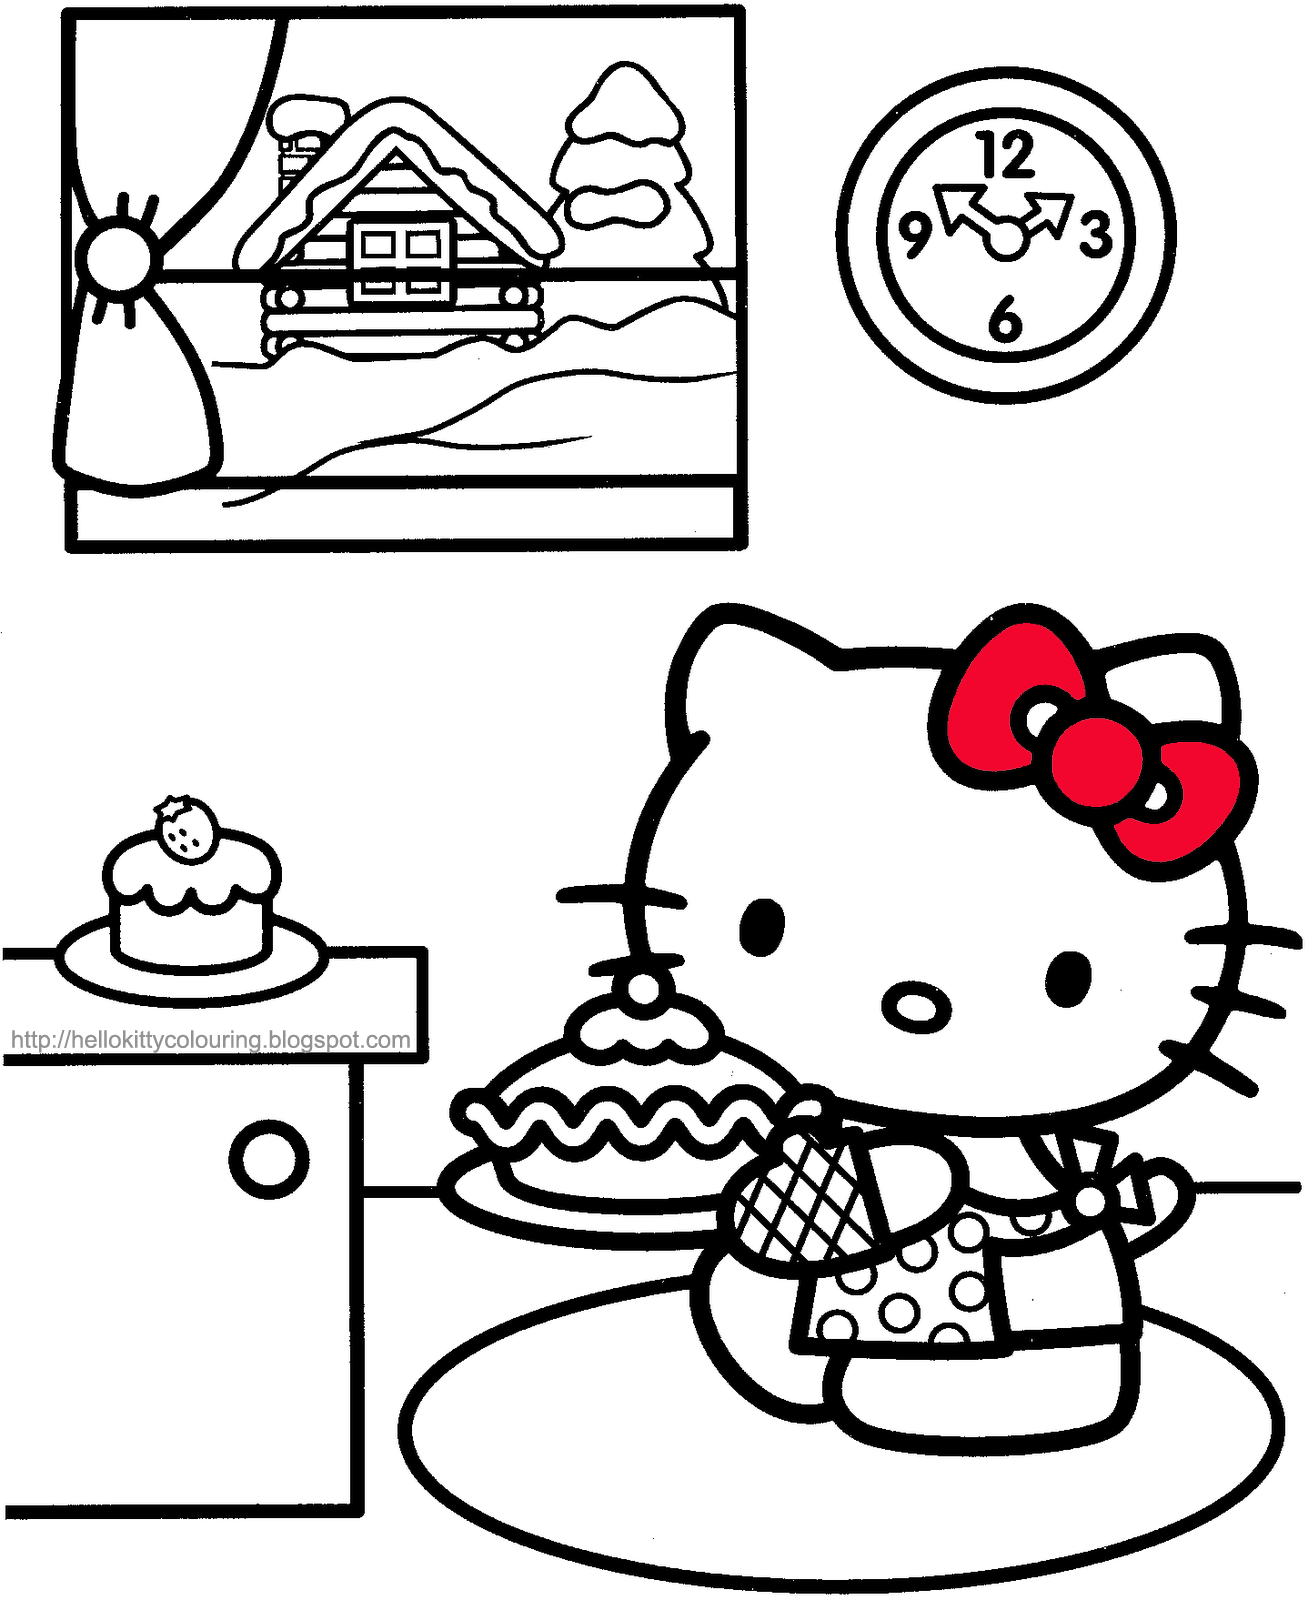 Baking Cupcake Coloring Pages - Coloring Pages For All Ages